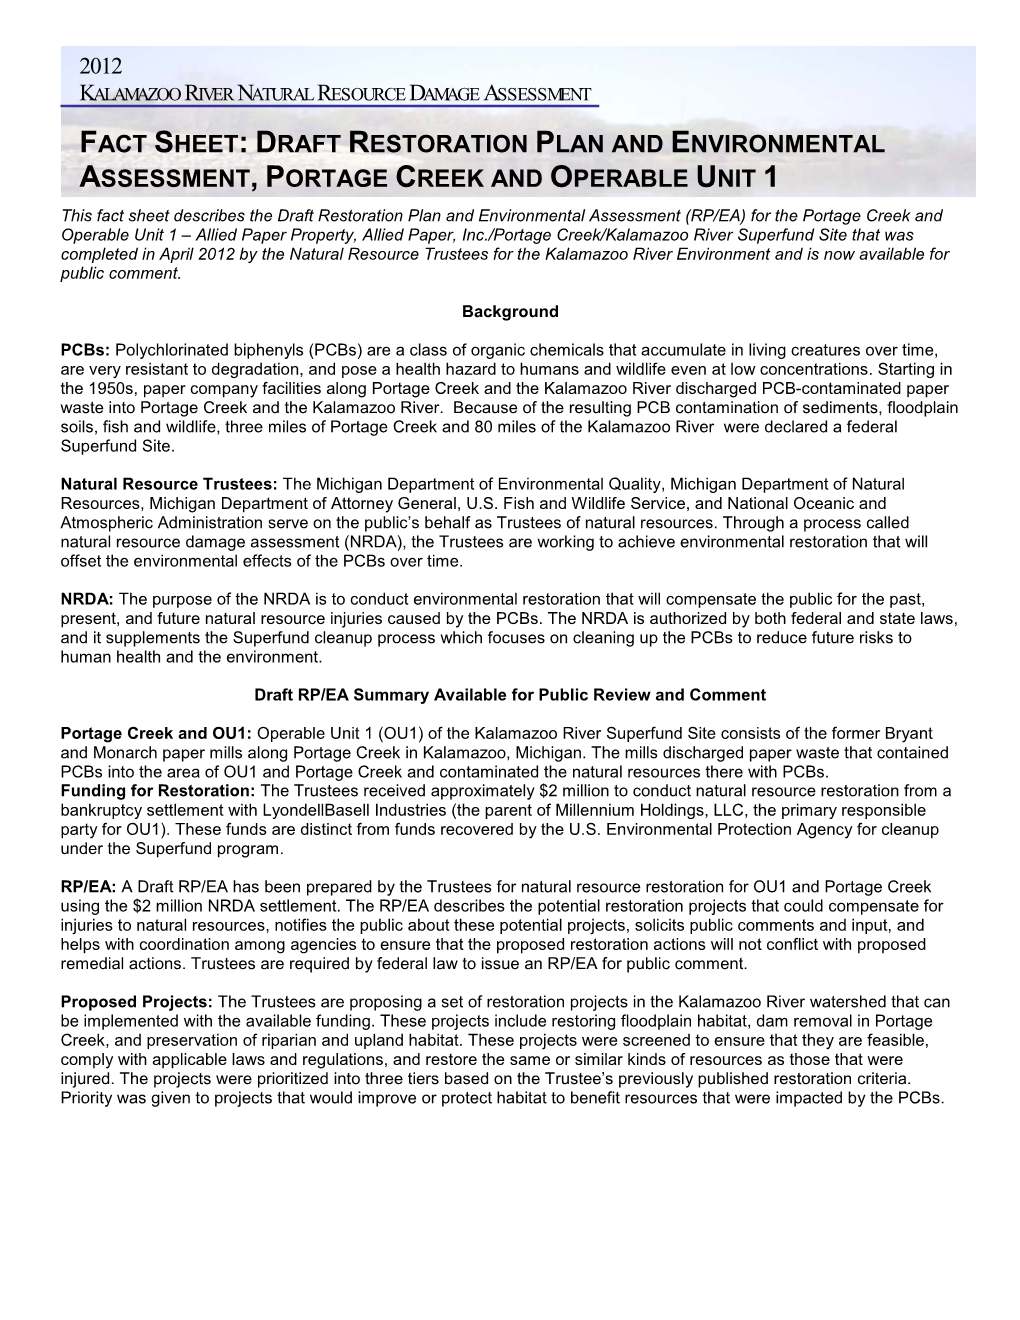 Fact Sheet on Draft Restoration Plan for Portage Creek and Operable